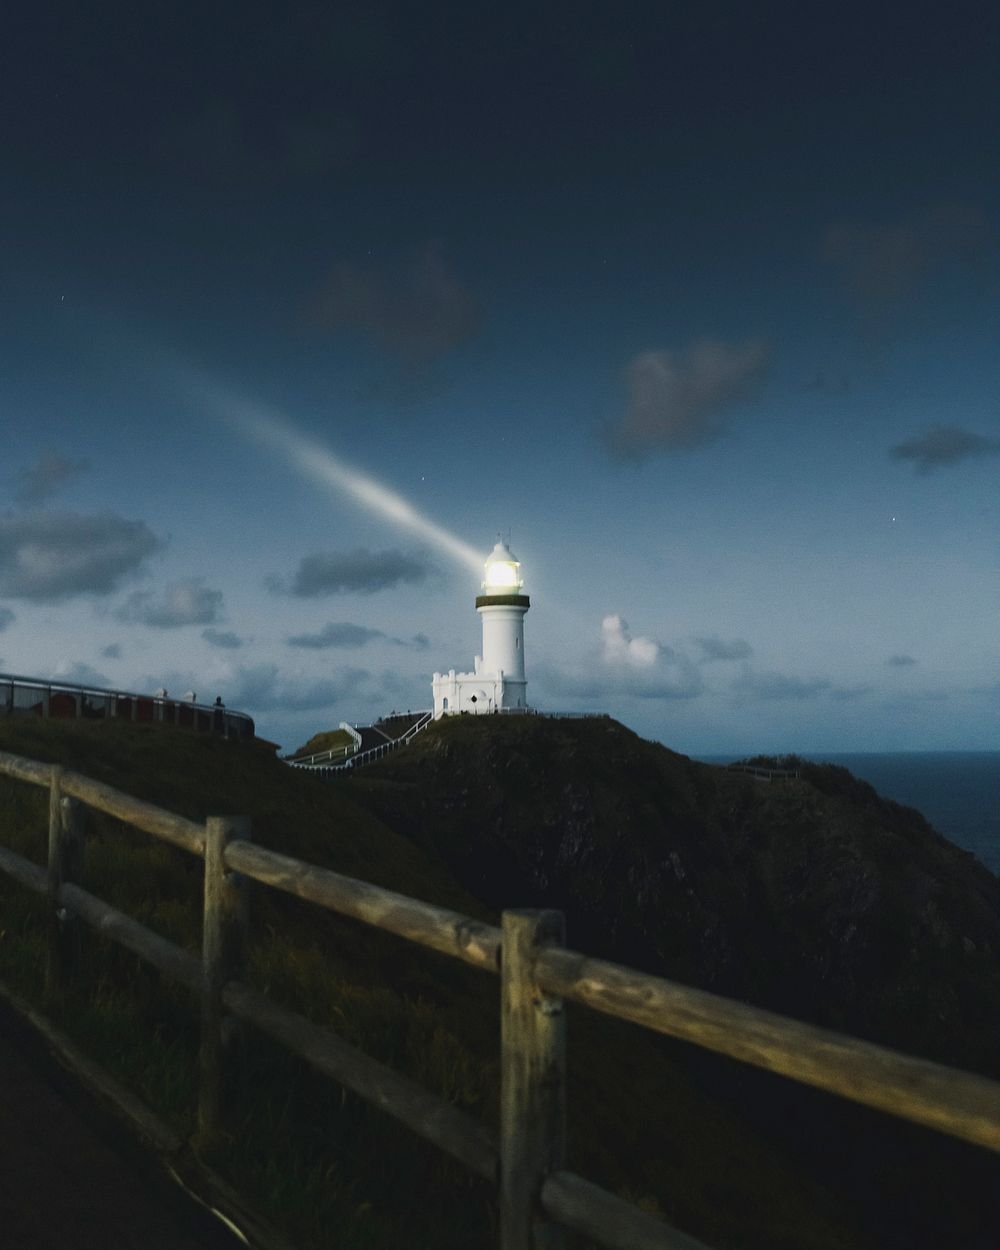 Lighthouse on the mountain at night